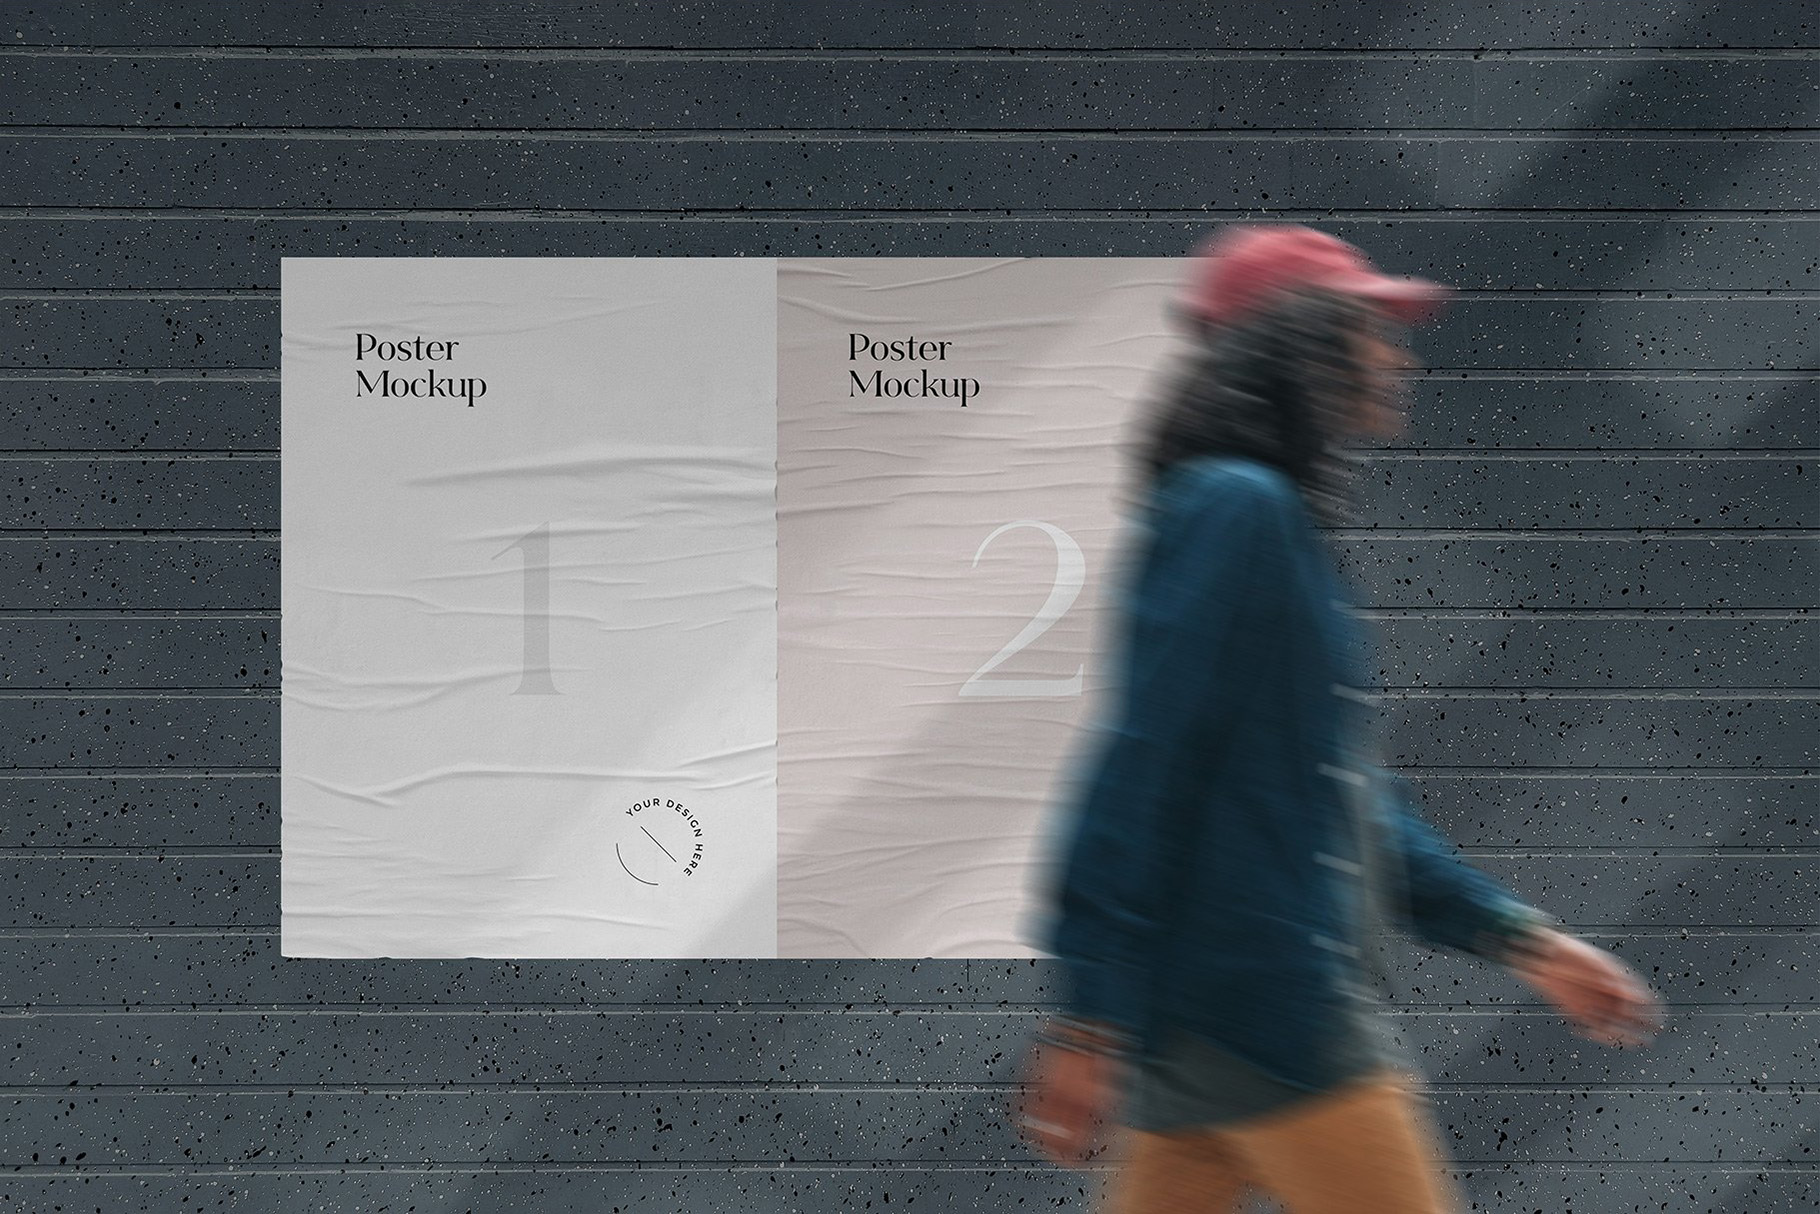 Glued Poster Mockups Collection by Pixelbuddha